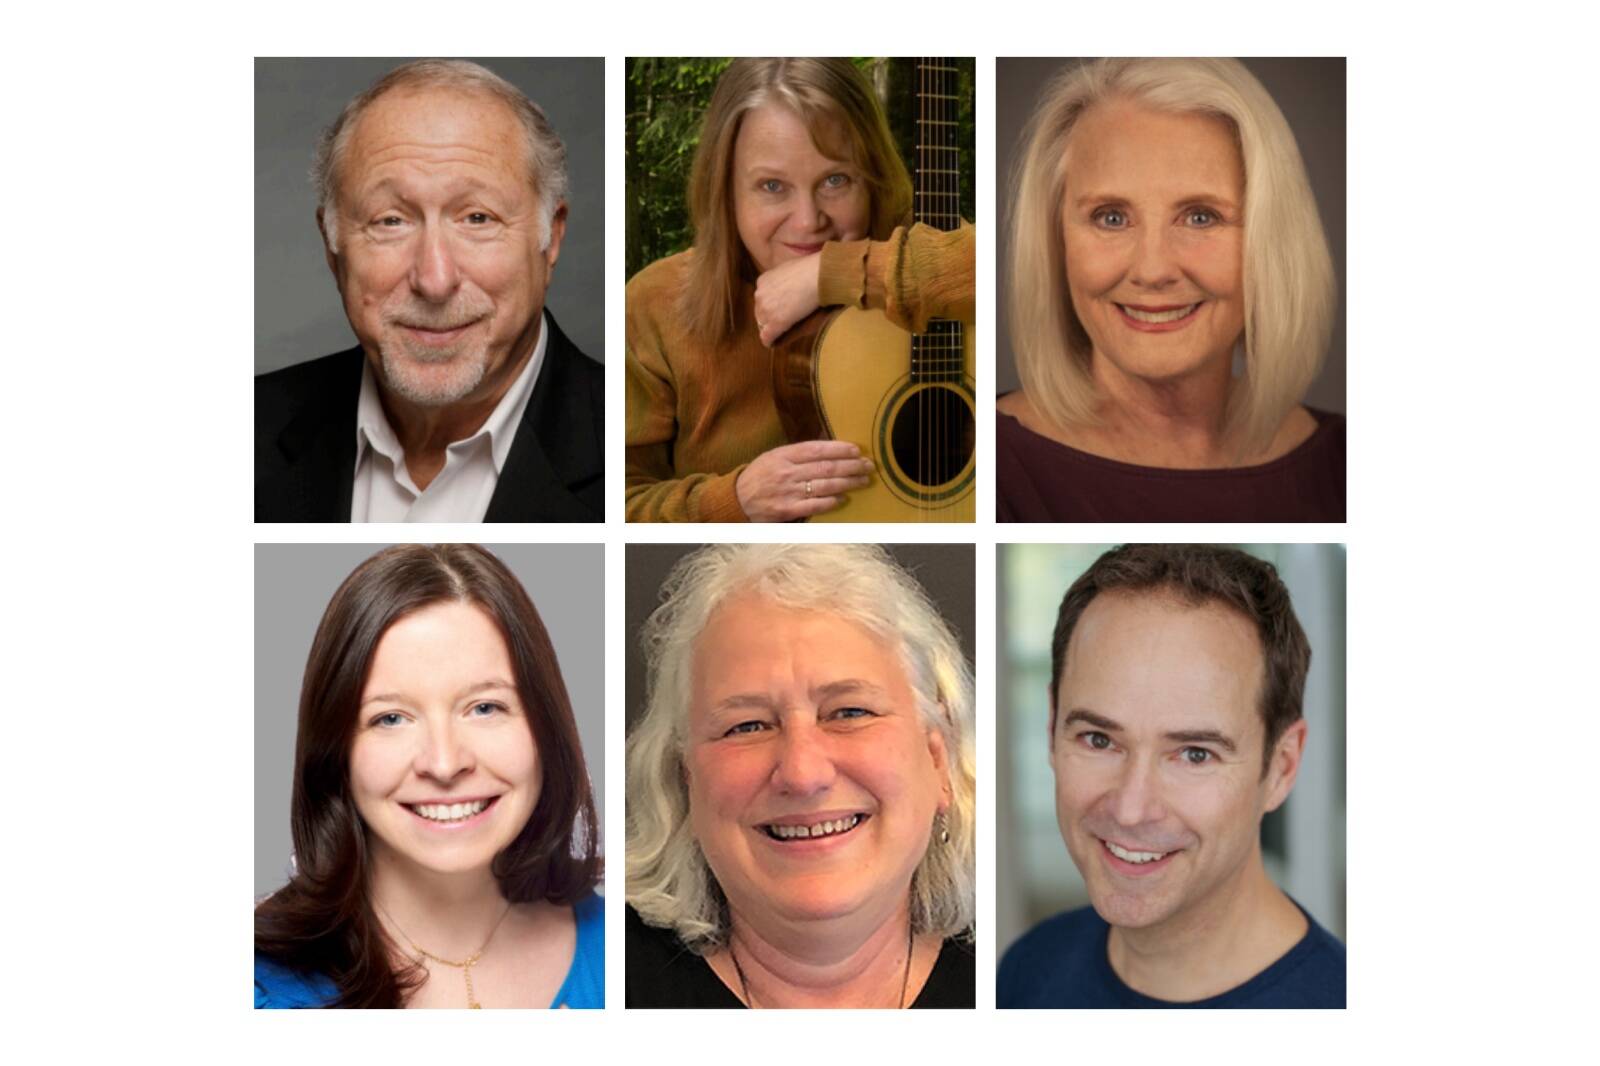 Local theater makers (top row, left to right) Paul Shapiro, Kat Eggleston, Jeanne Dougherty, (bottom row) Cate O’Kane, Charlotte Tiencken, and David Mielke, will revive “Kissing the Joy: The Wit and Wisdom of Brian Doyle.” Tiencken is the show’s director (Courtesy Photos).